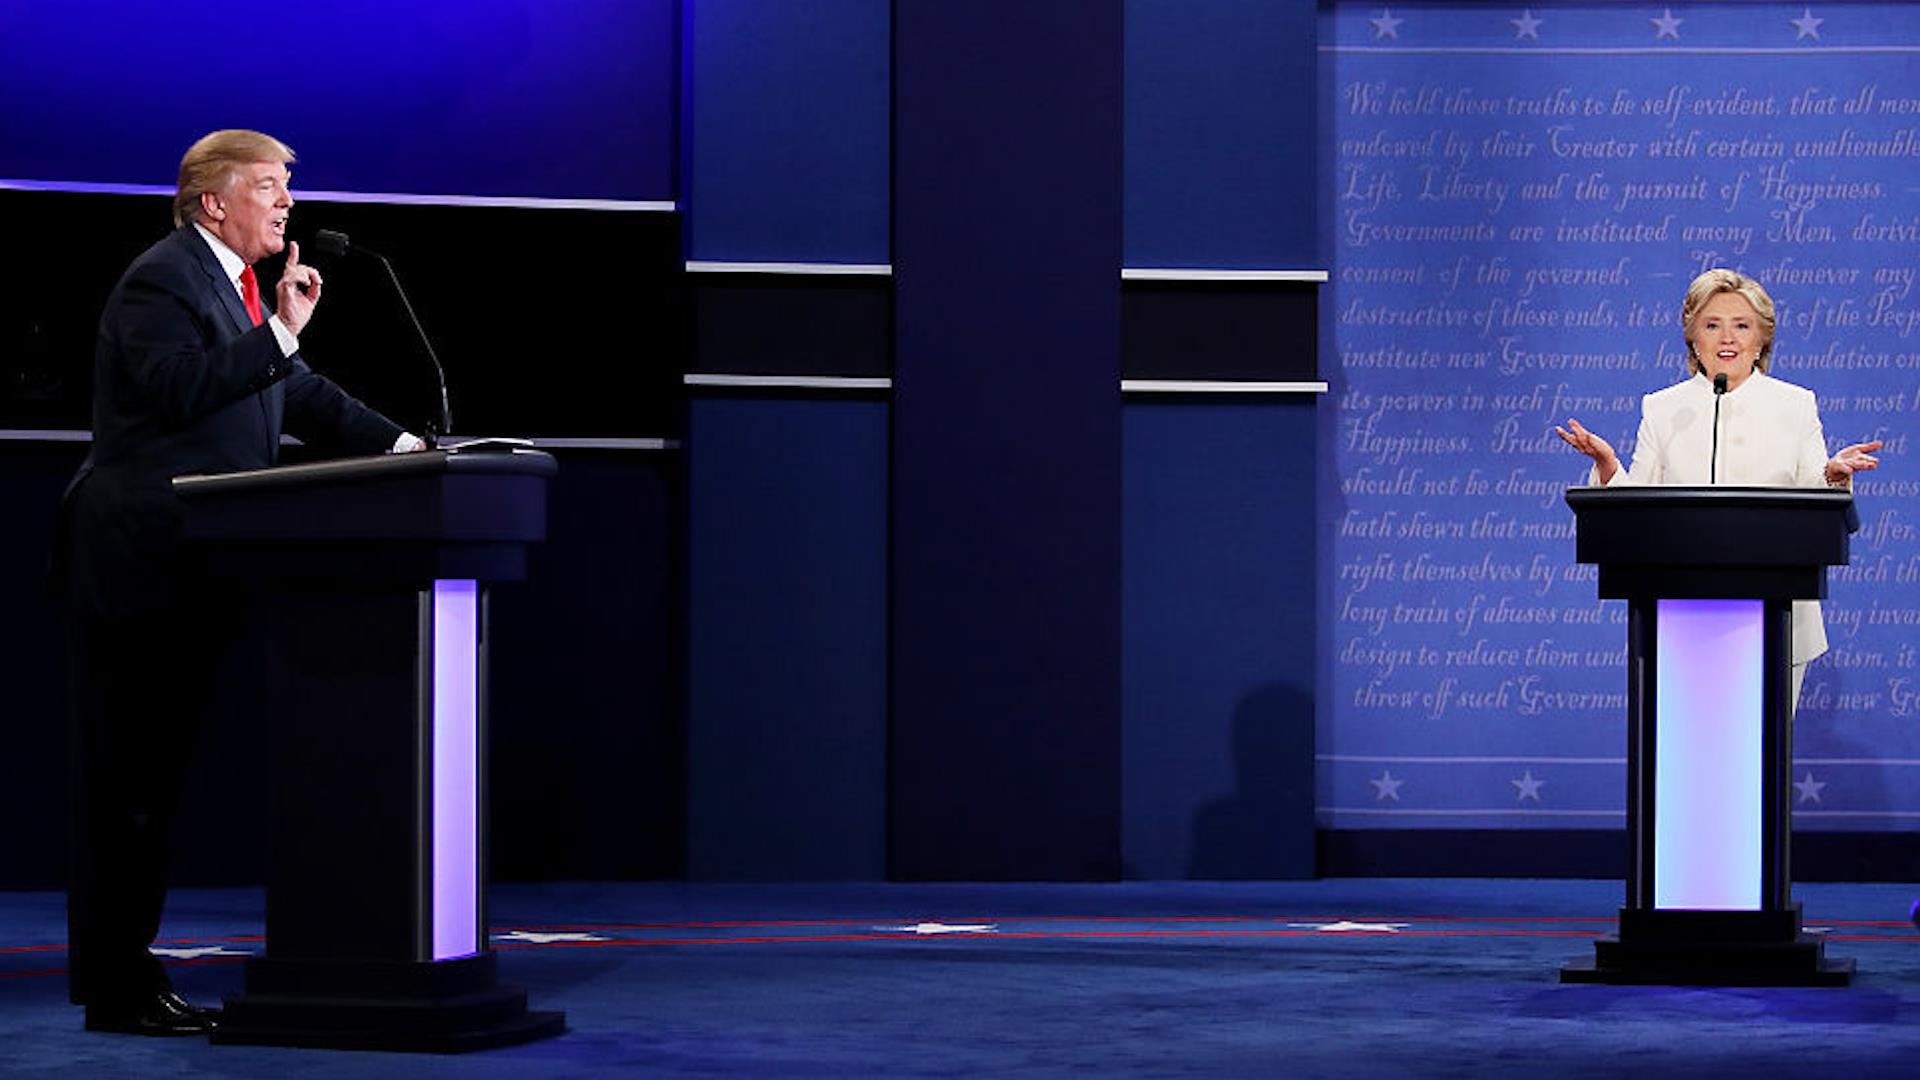 'Nasty Woman' and 'Bad Hombres': Top Moments From Final Debate